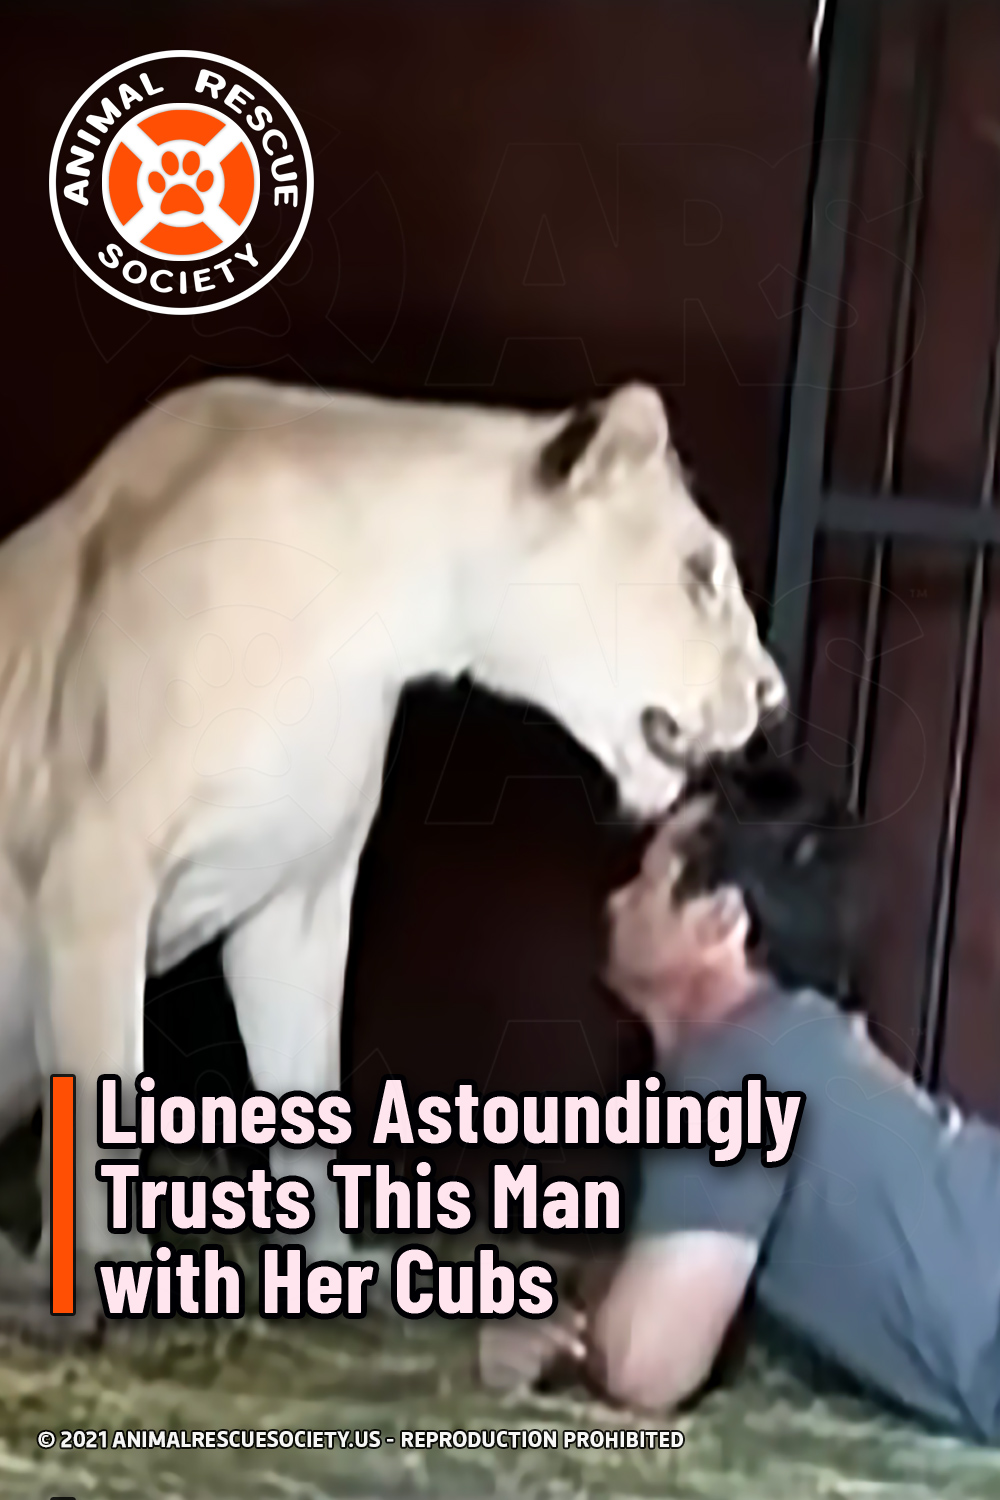 Lioness Astoundingly Trusts This Man with Her Cubs